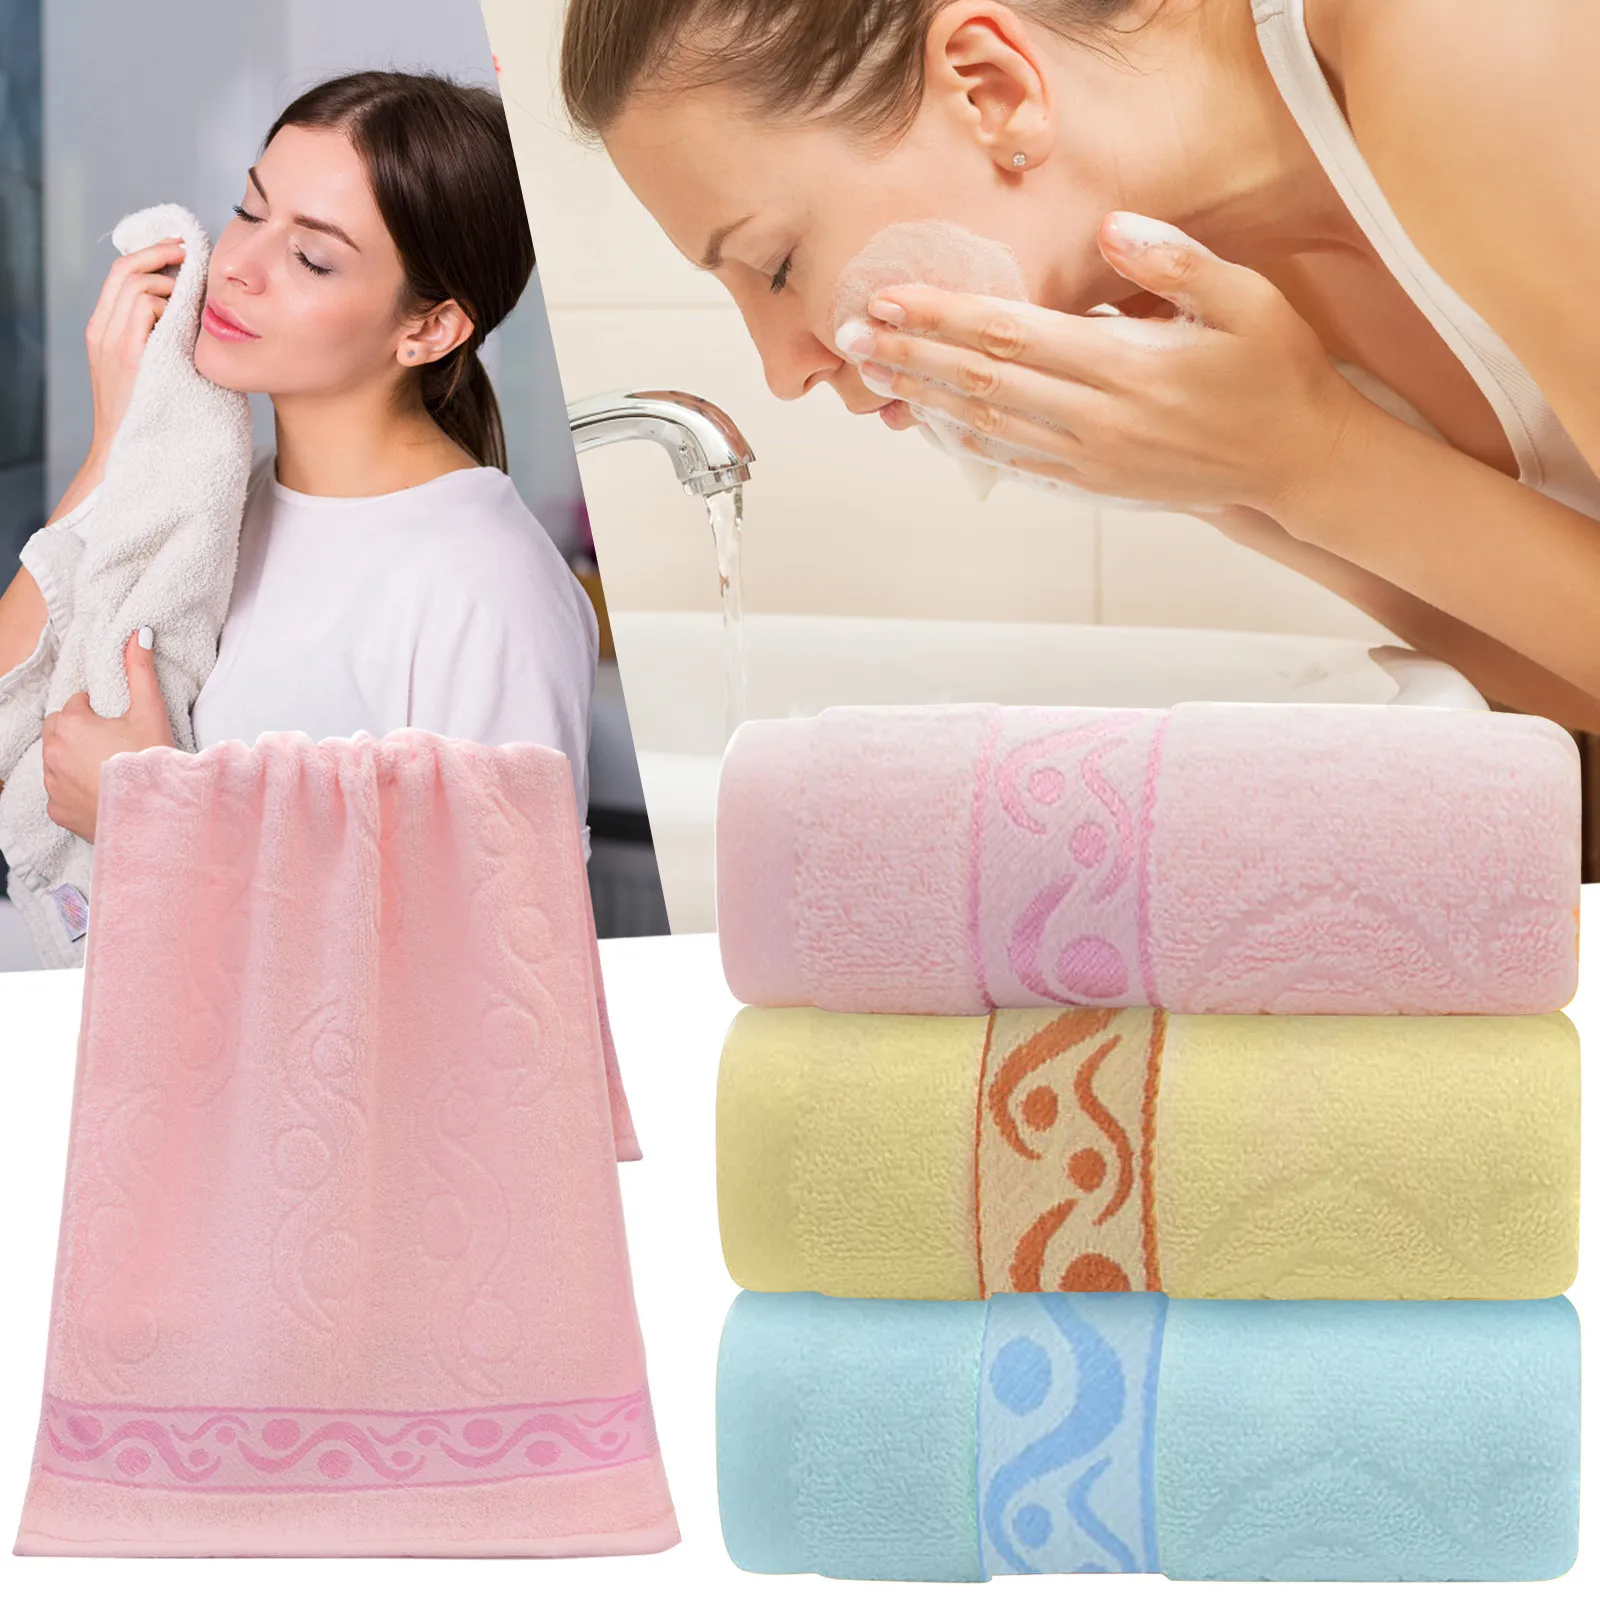 

3PC Towel Absorbent Clean And Easy To Clean Cotton Absorbent Soft Aqua Blue Towels Christmas Towels Bath Bathroom Rug Towel